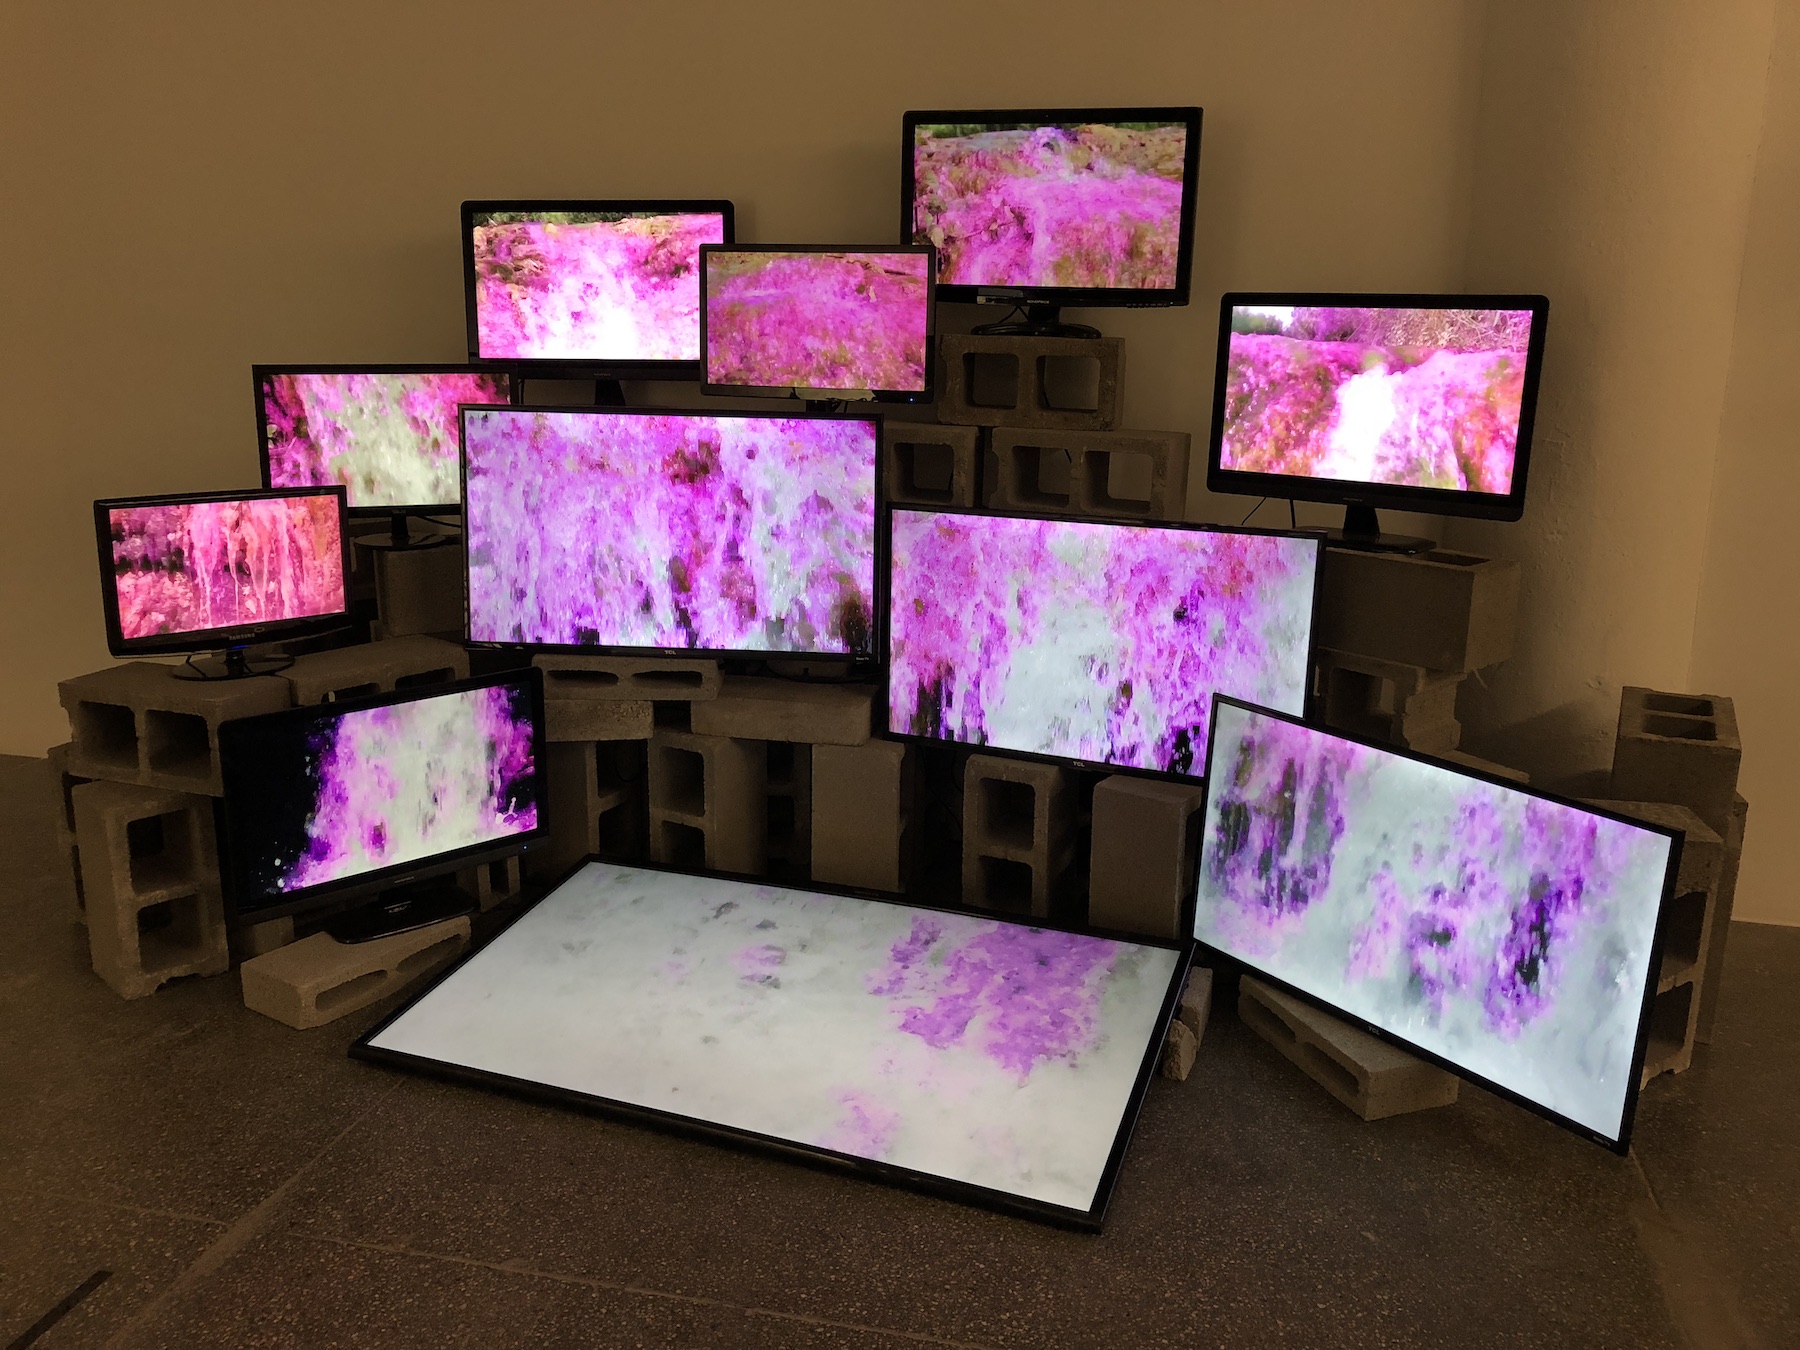 Multi computer Screens with pink and grey wallpaper